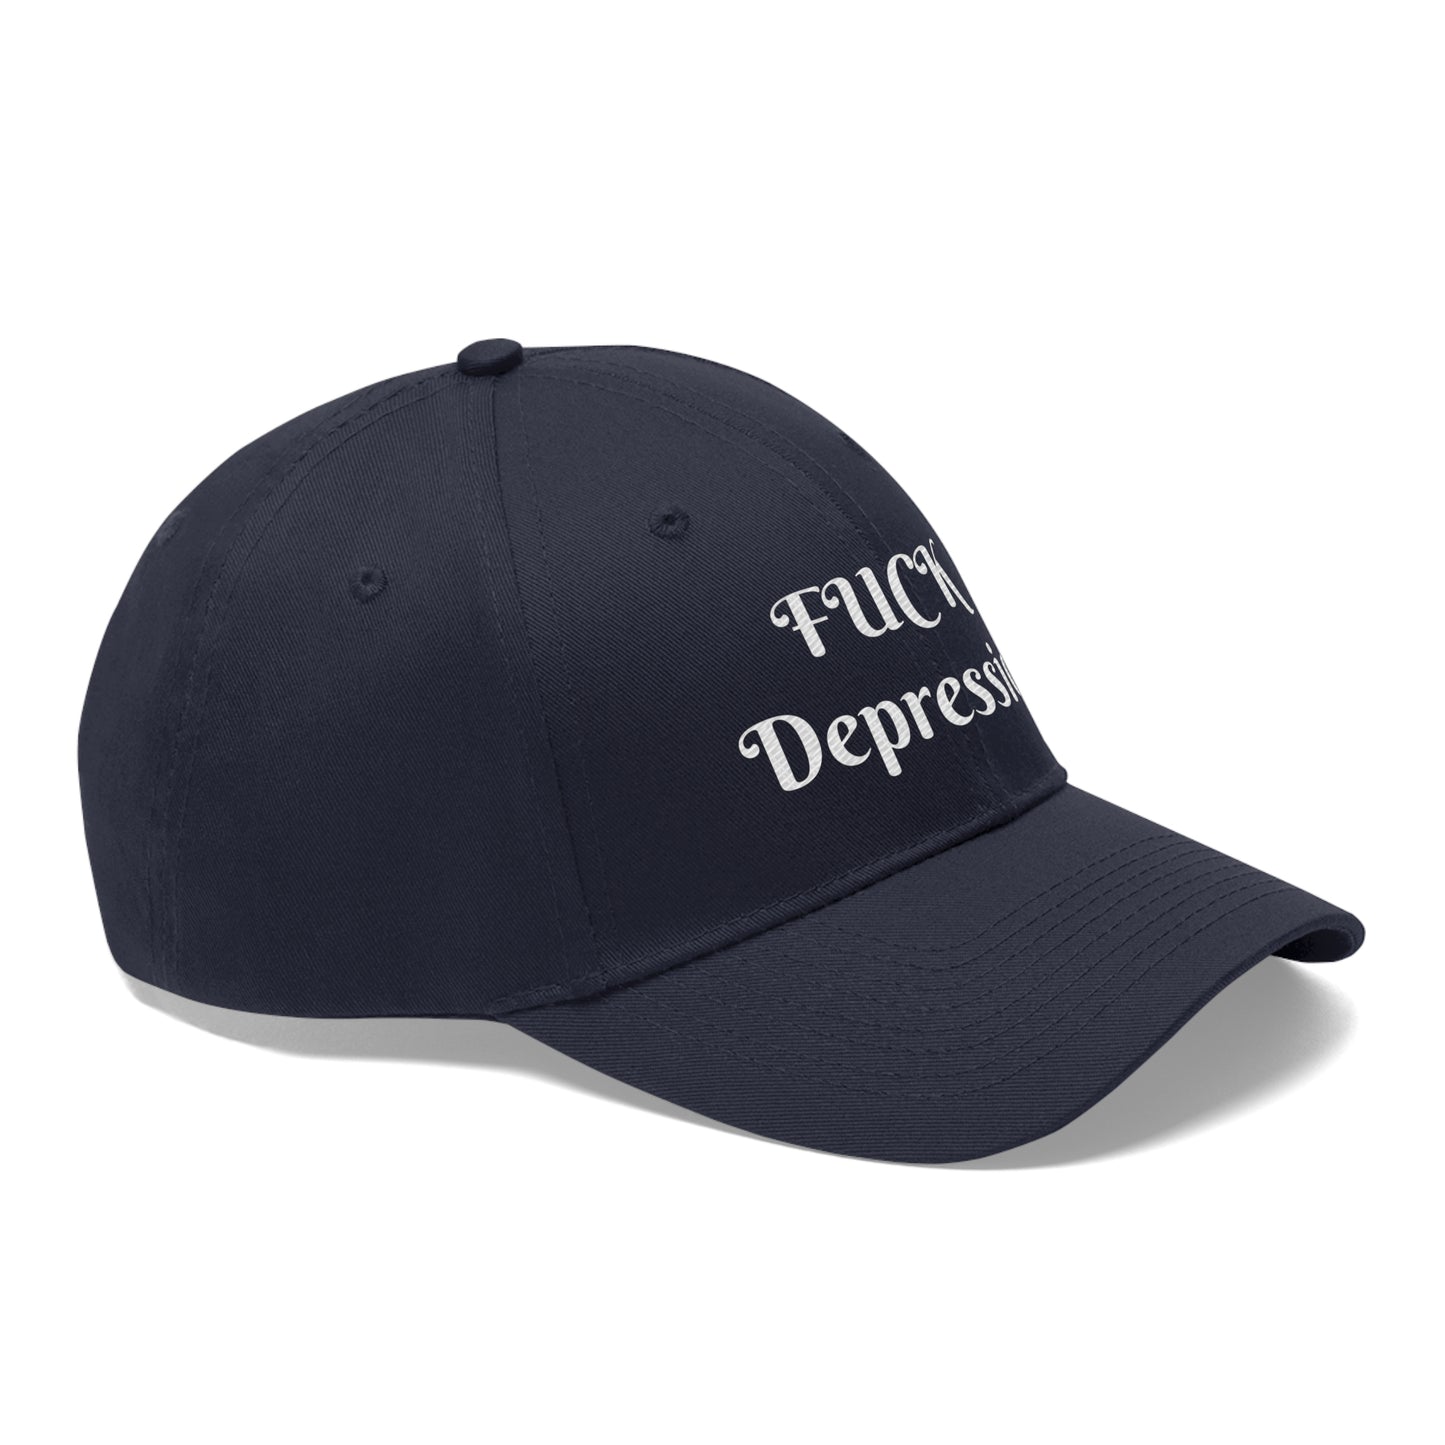 Fuck Depression Embroidered Hat for Empowerment and Awareness